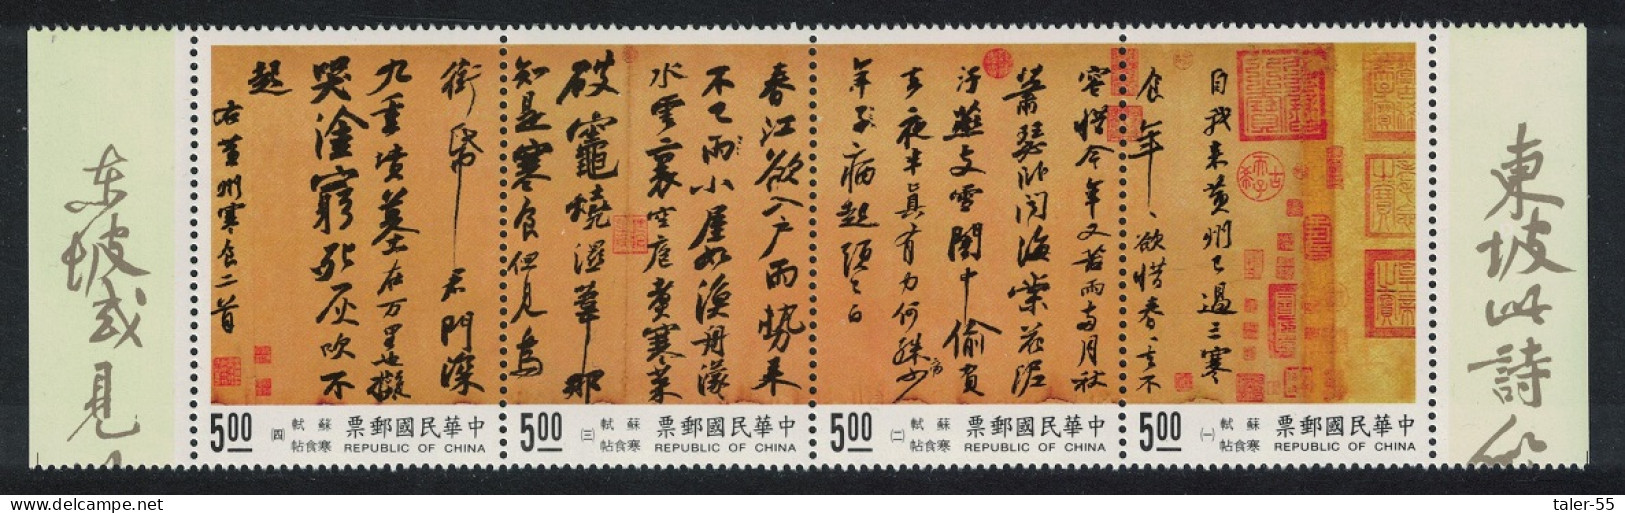 Taiwan Calligraphy 'Cold Food Observance' 4v Margin Strip 1995 MNH SG#2246-2249 - Unused Stamps